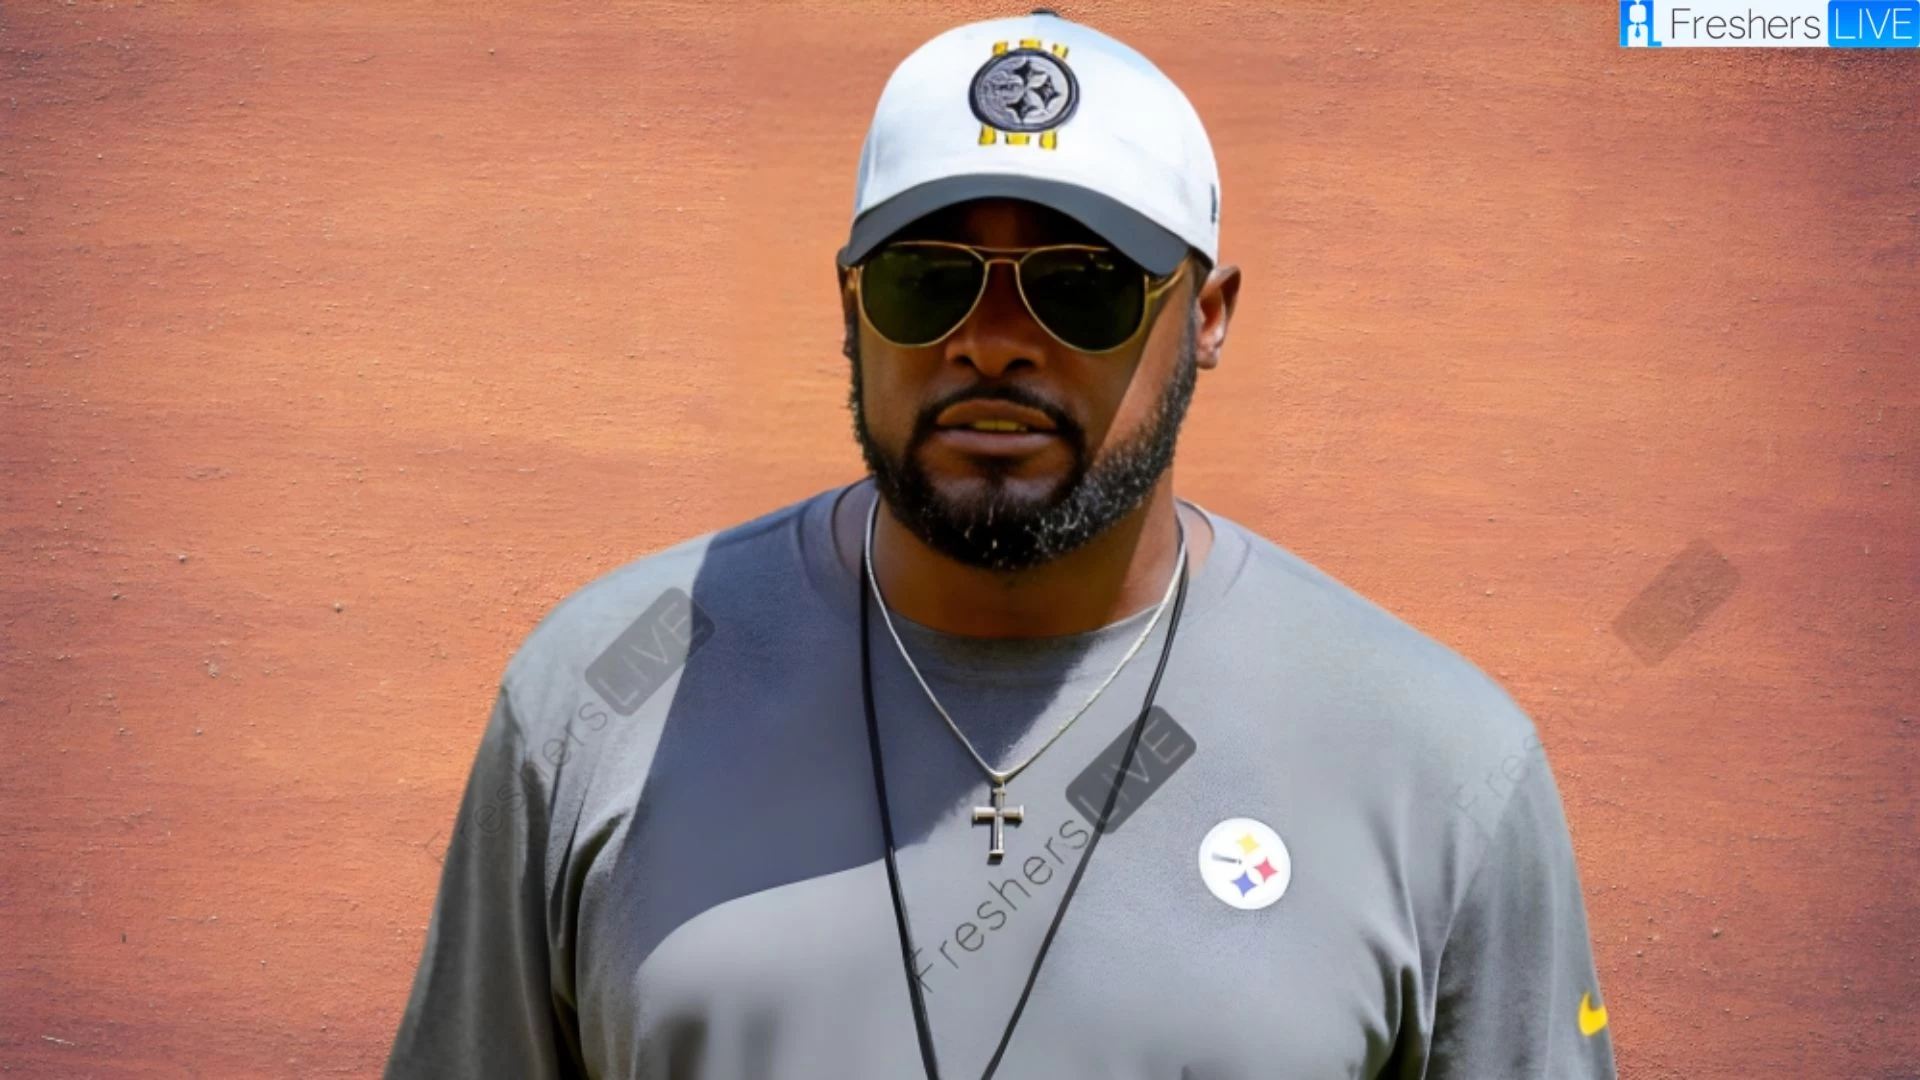 Mike Tomlin Religion What Religion is Mike Tomlin? Is Mike Tomlin a Christian?